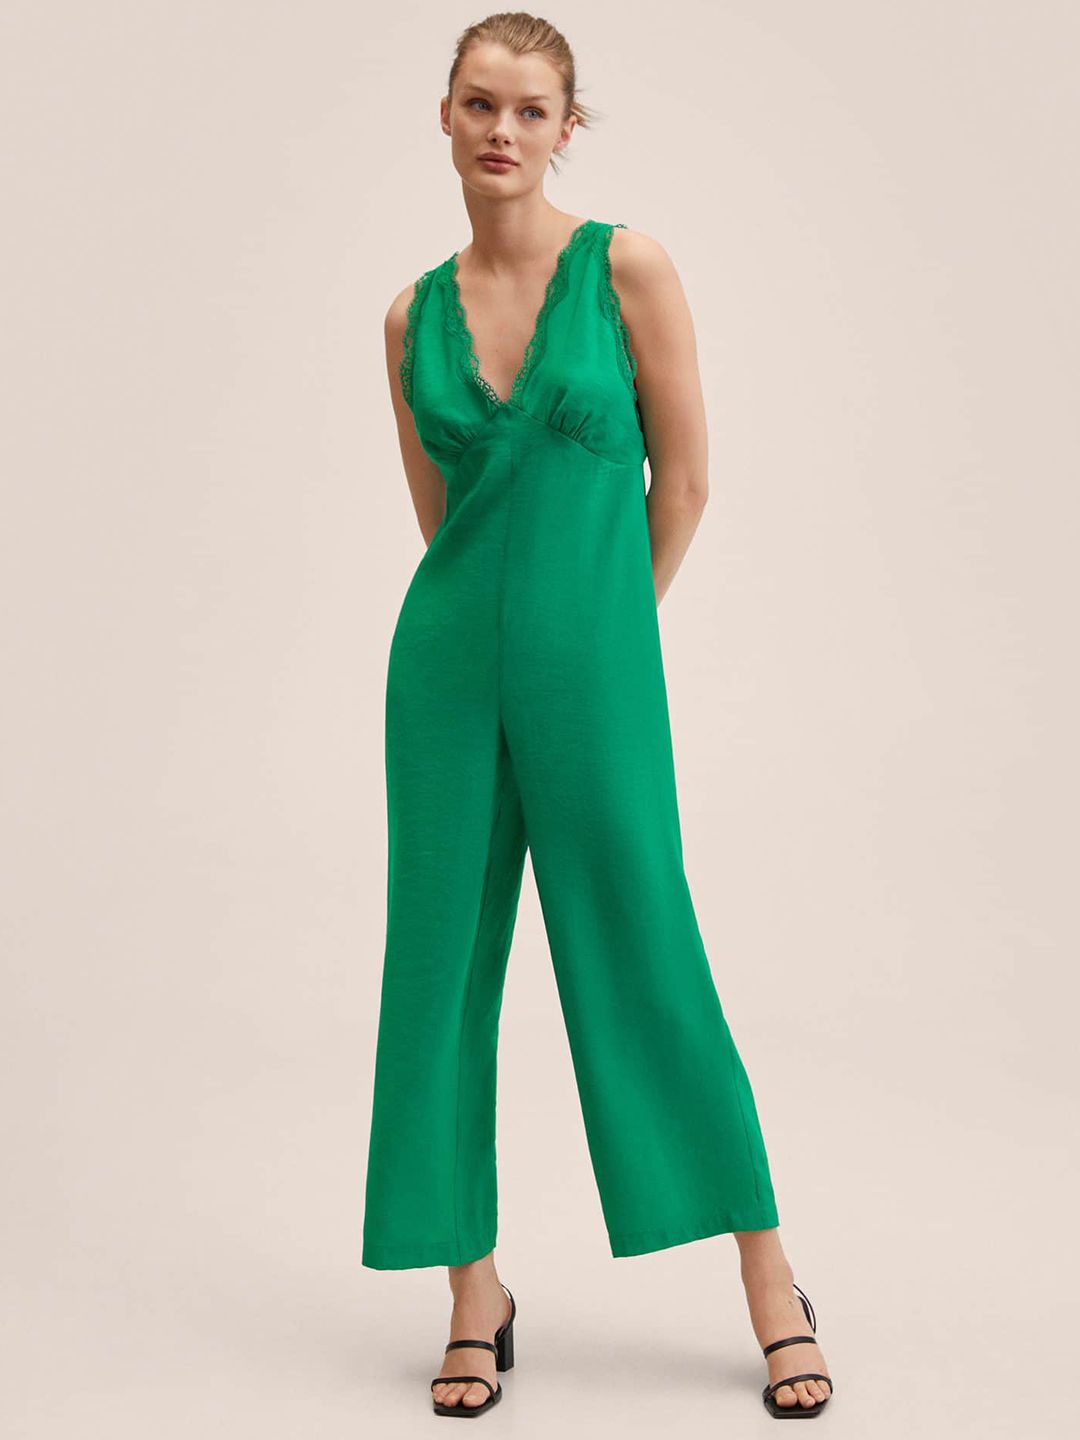 MANGO Green Solid Basic Jumpsuit with Lace Inserts Price in India